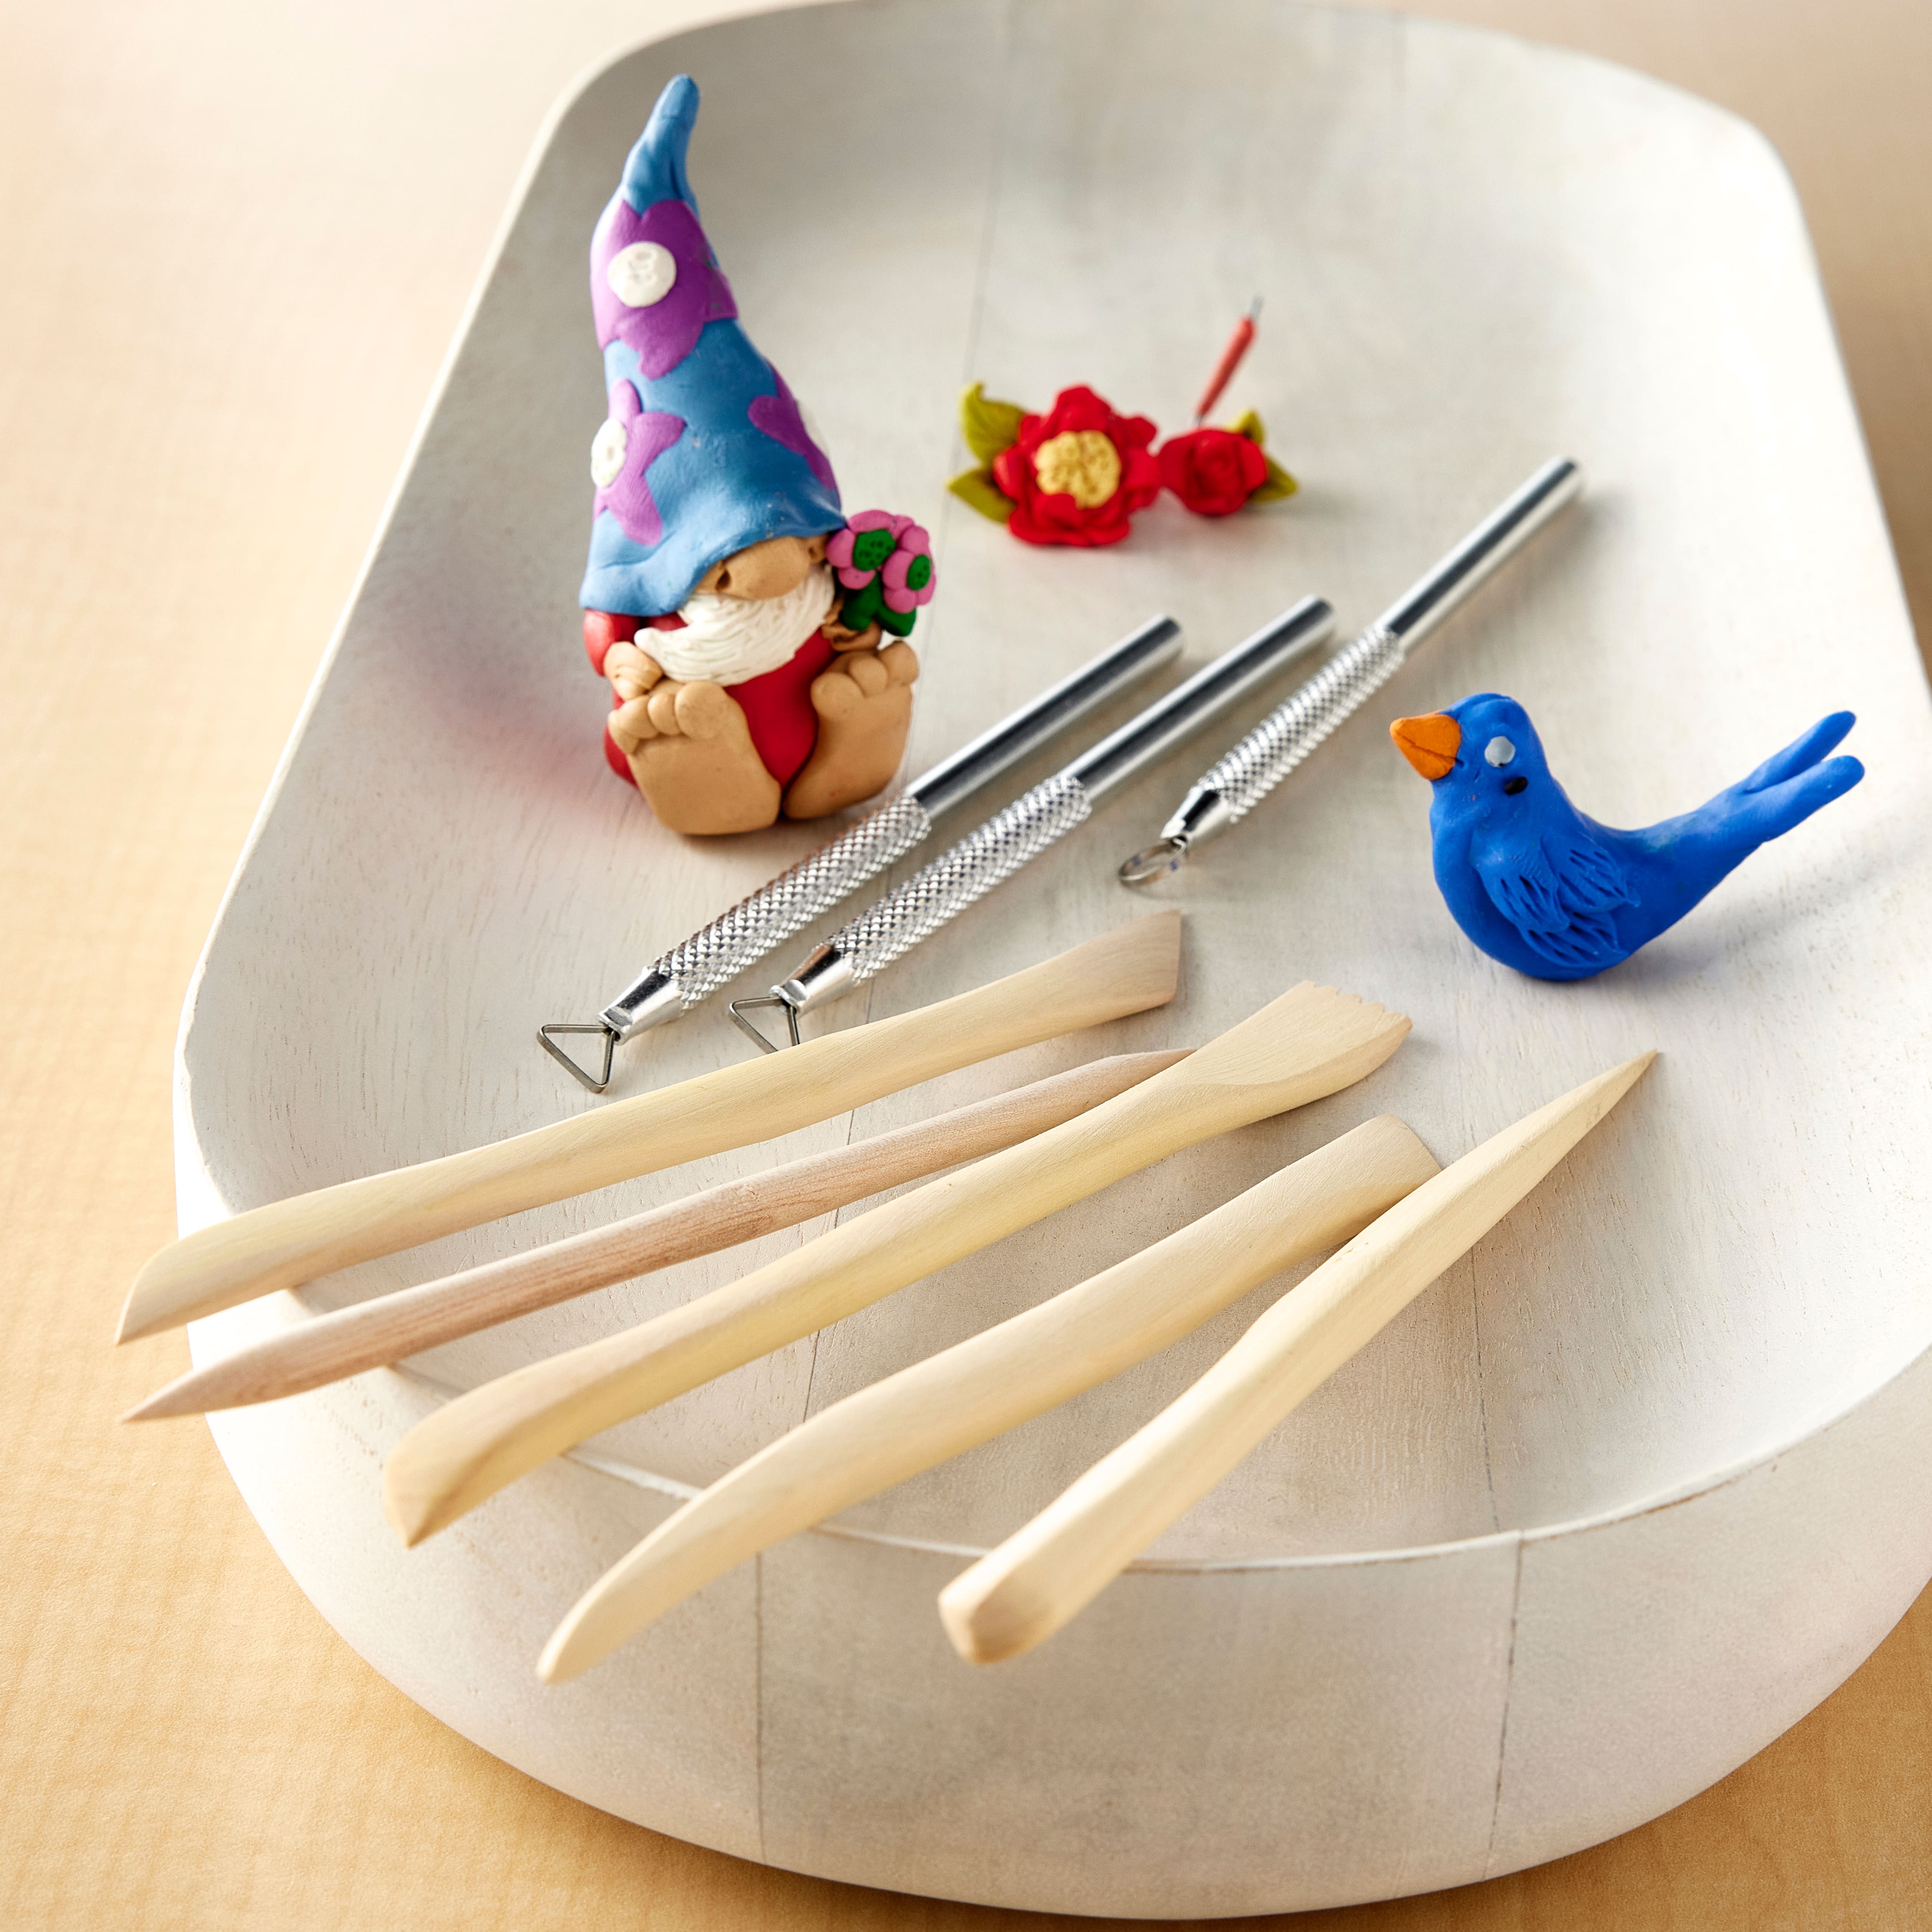 Mini Clay Tool Set by ArtMinds&#x2122;